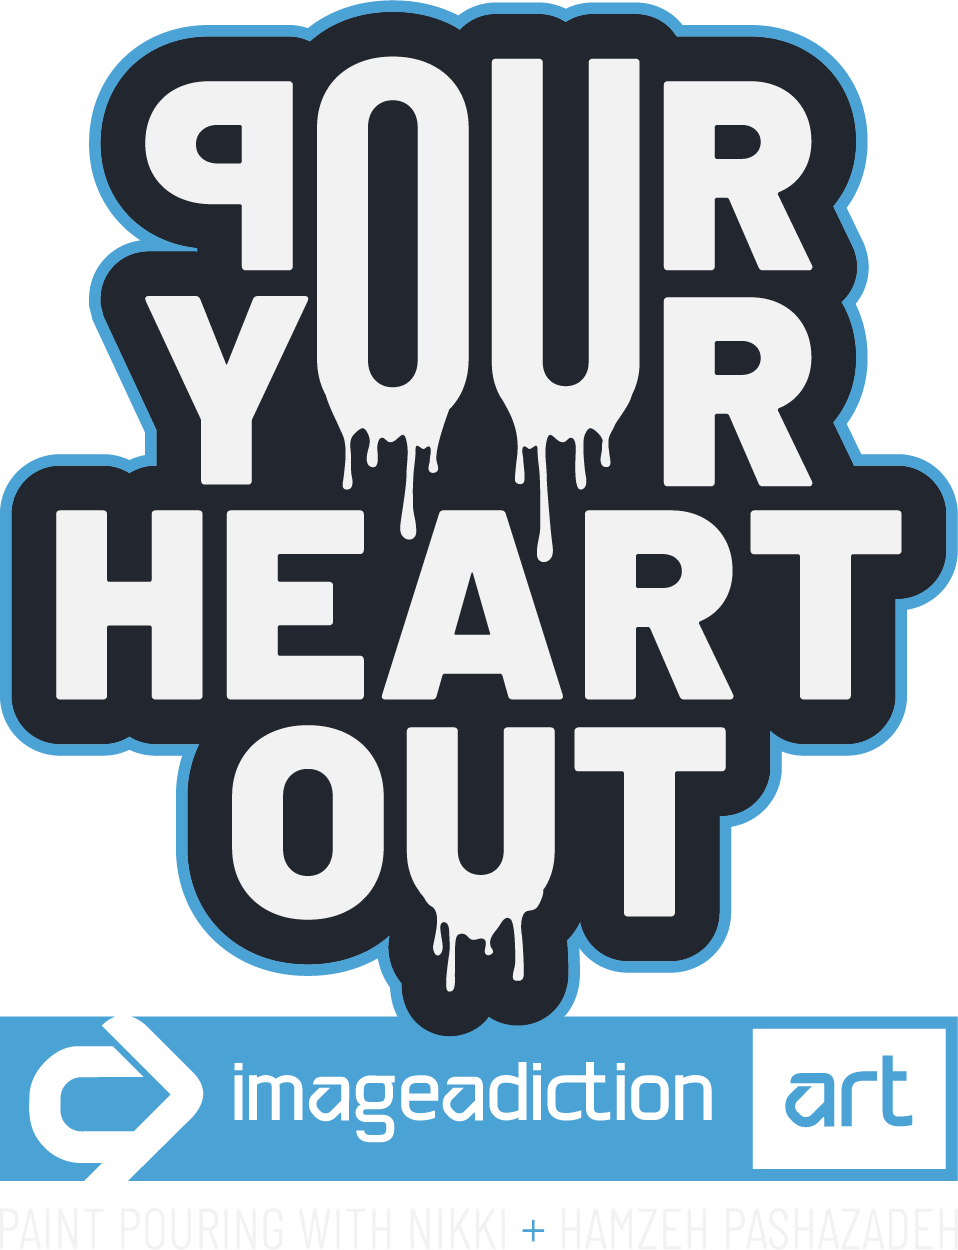 Pour Your Heart Out with imageAdiction Art